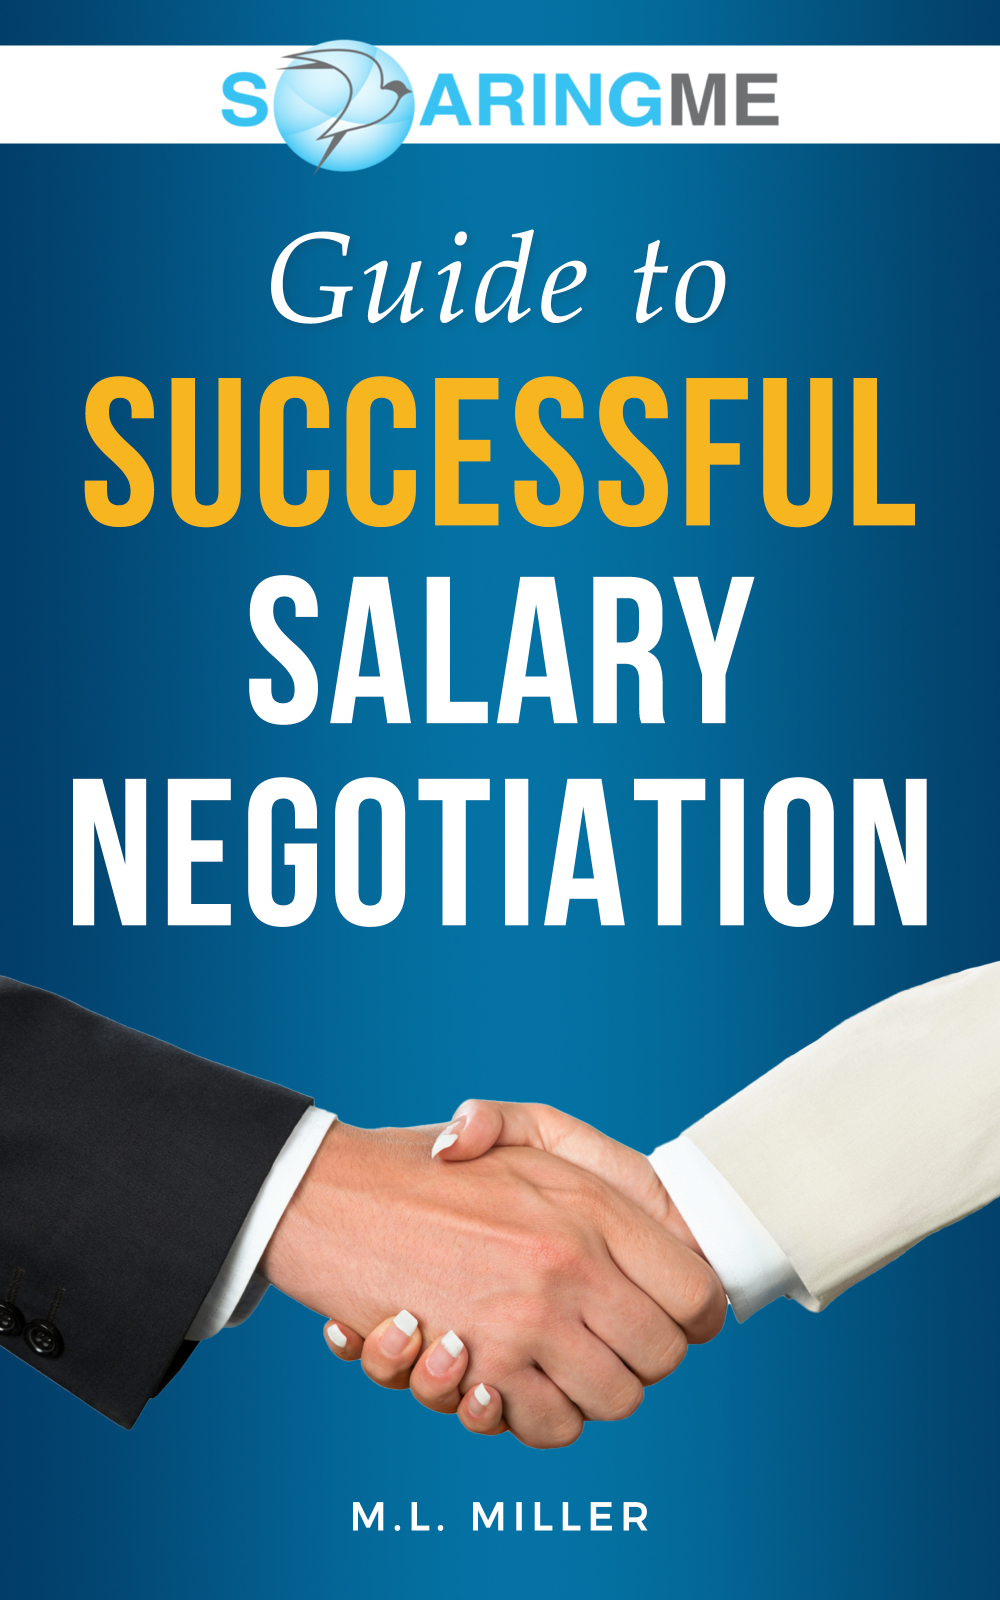 Guide to Successful Salary Negotiation